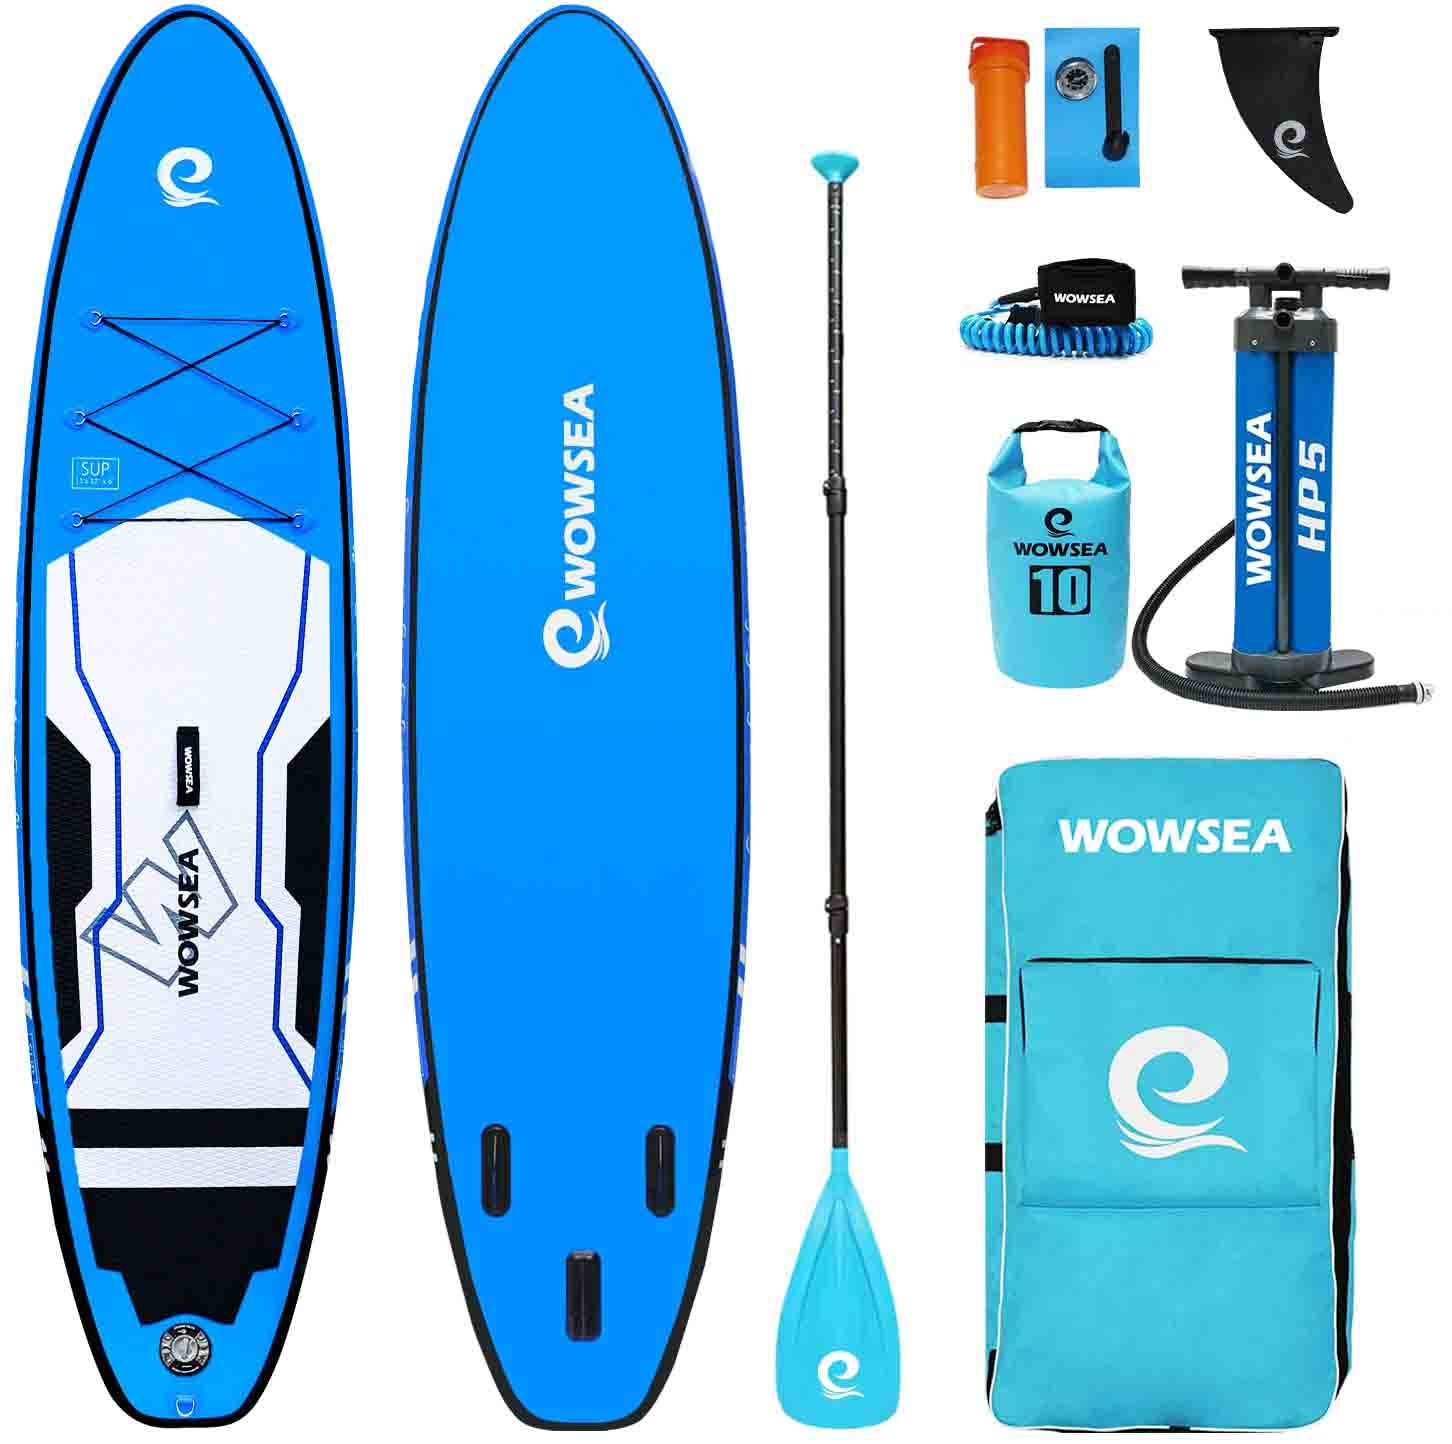 WOWSEA Trophy T1 Stand Up Paddle Board Hinchable